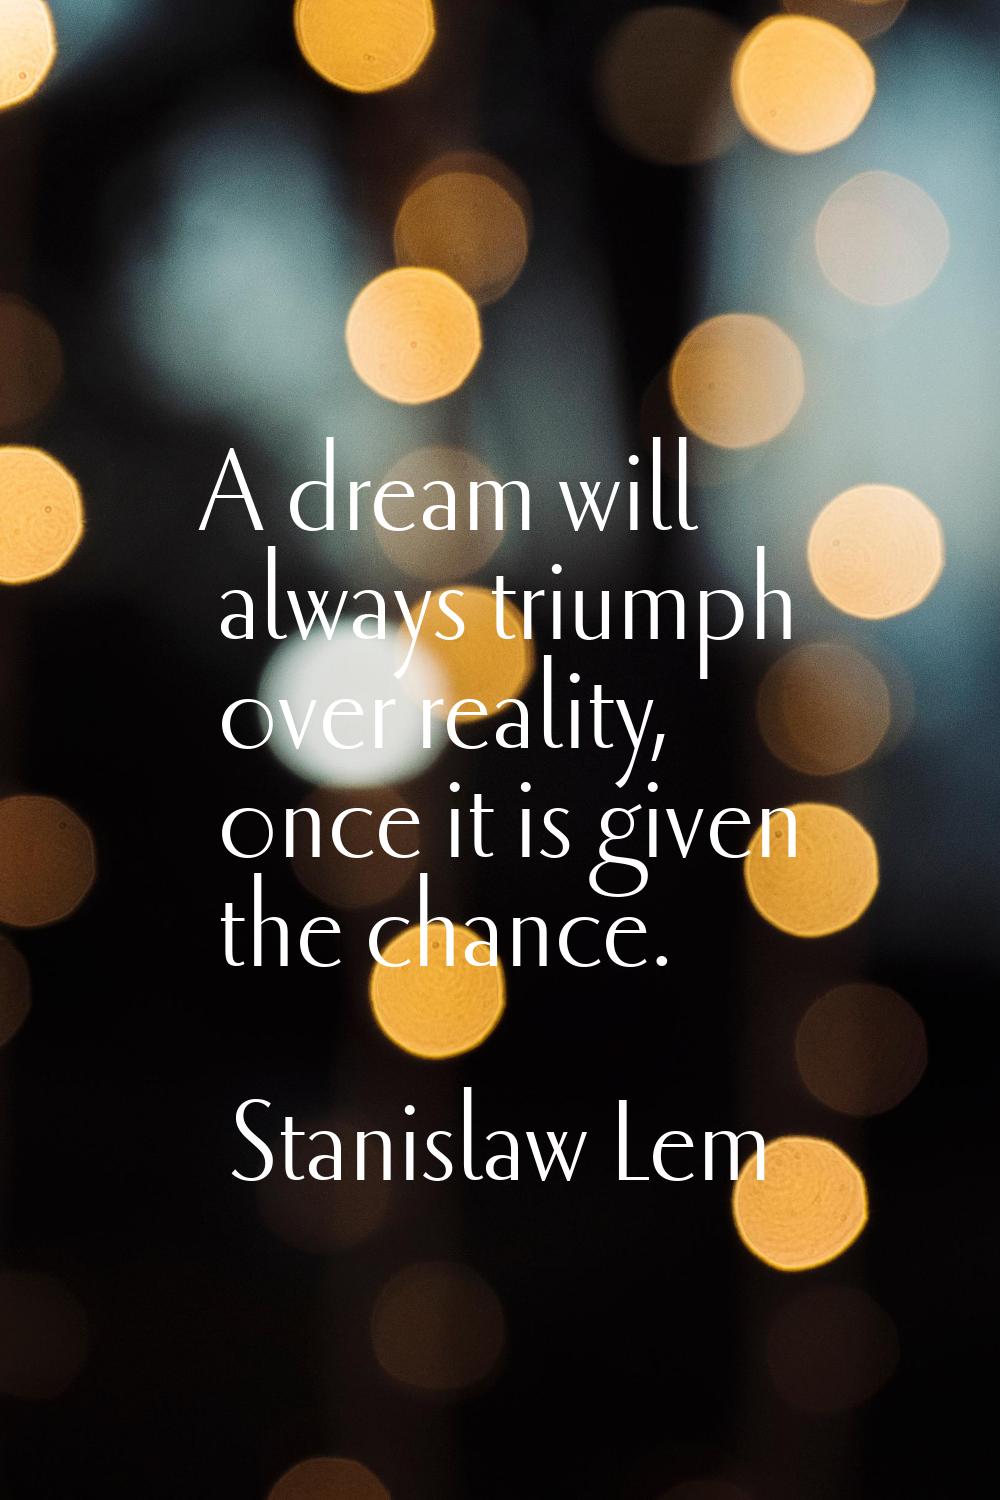 A dream will always triumph over reality, once it is given the chance.